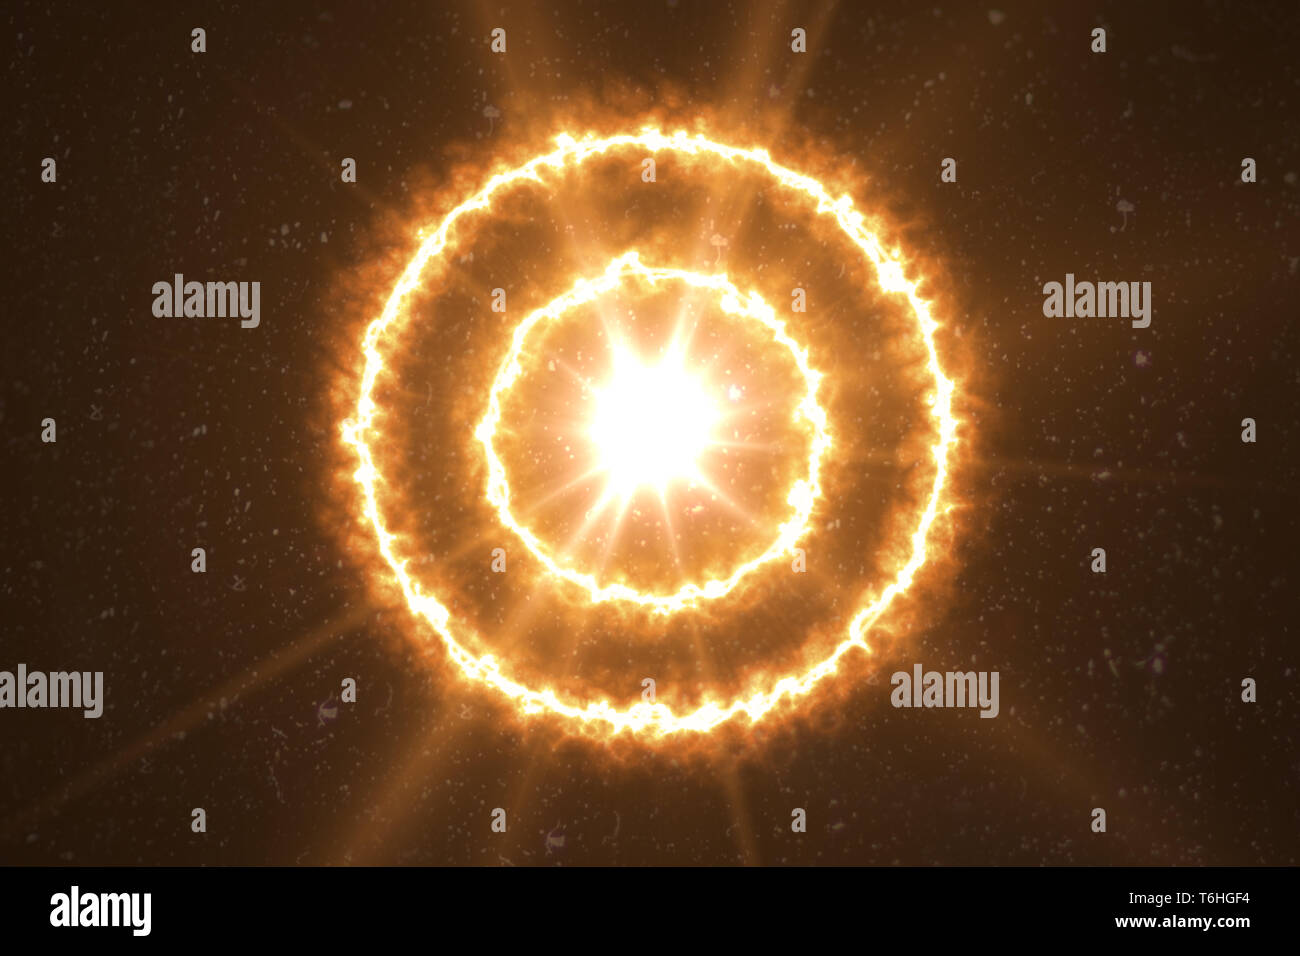 3d Illustration of Compositing Light Effects on a Burning Ring of Fire  Stock Illustration - Illustration of glowing, bright: 263205198